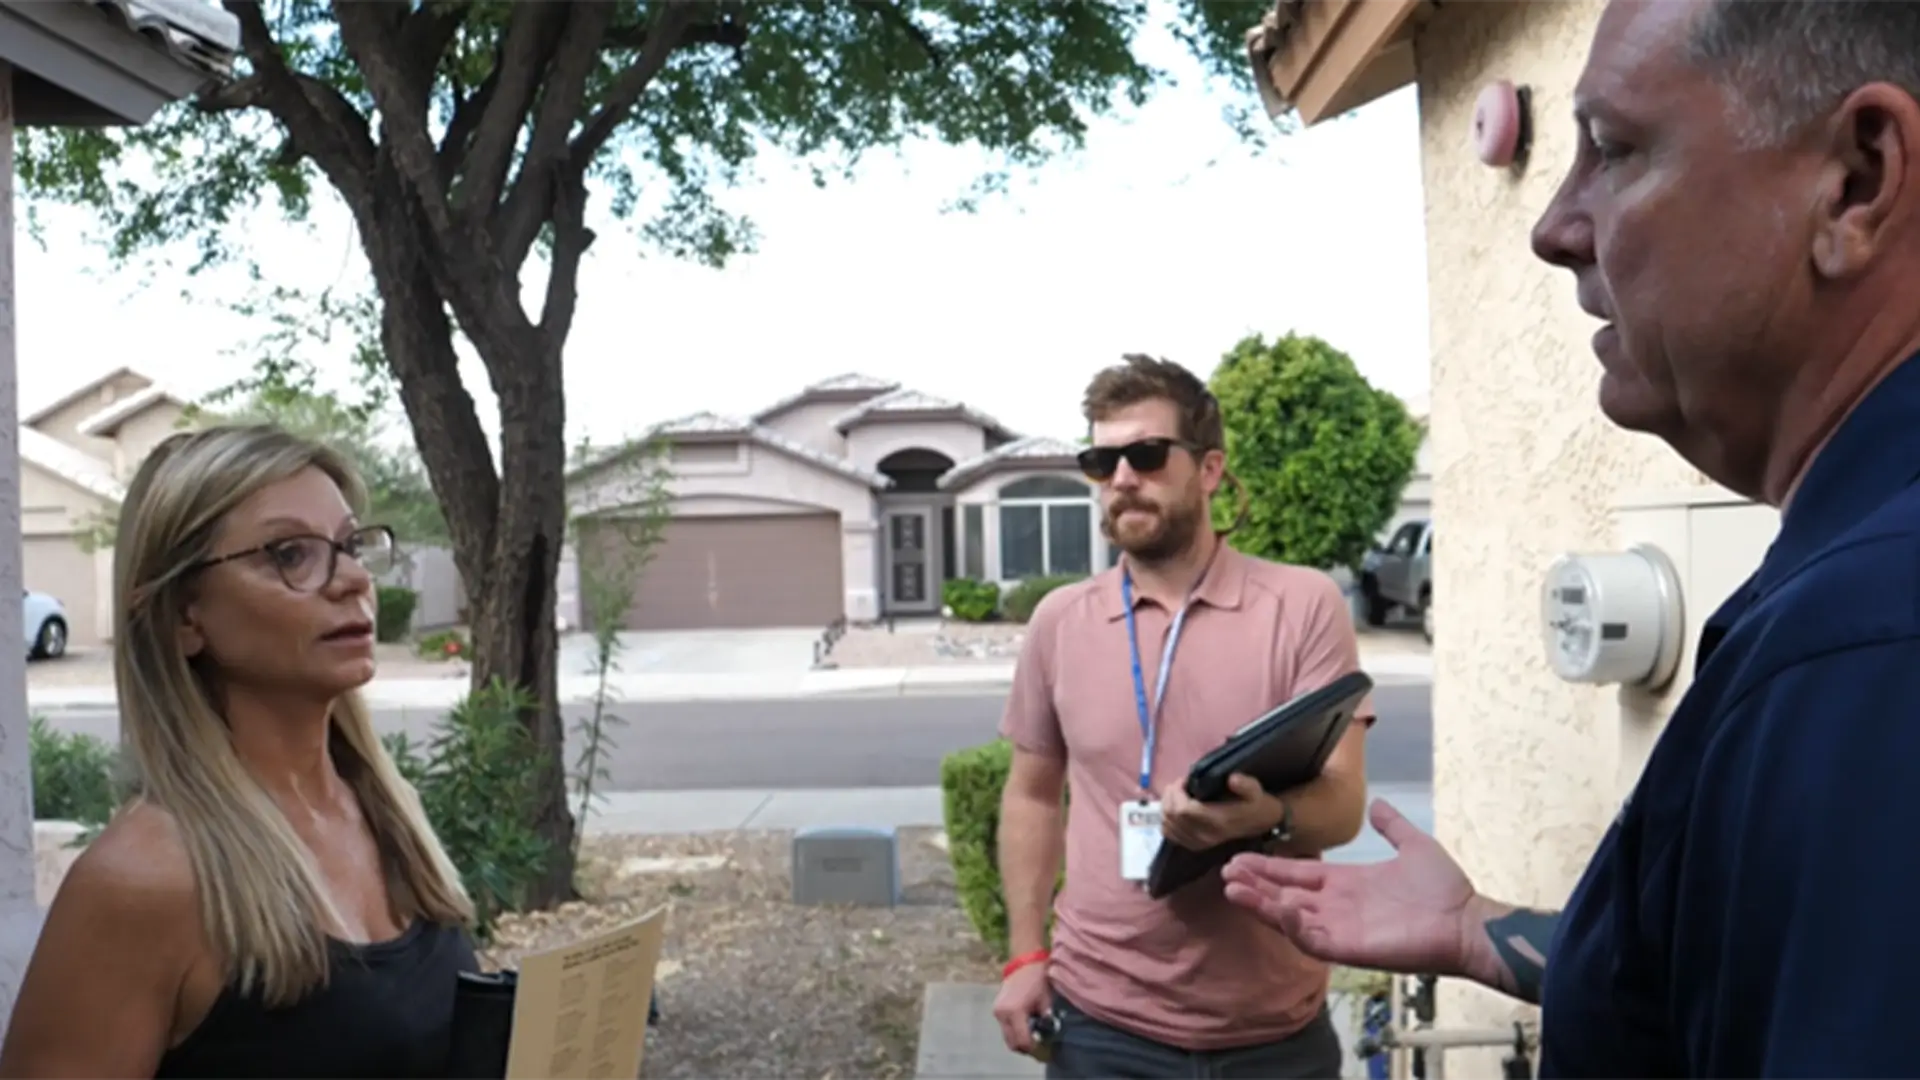 Scottsdale resident discussing an outdoor water efficiency check with two staff from scottdsale water